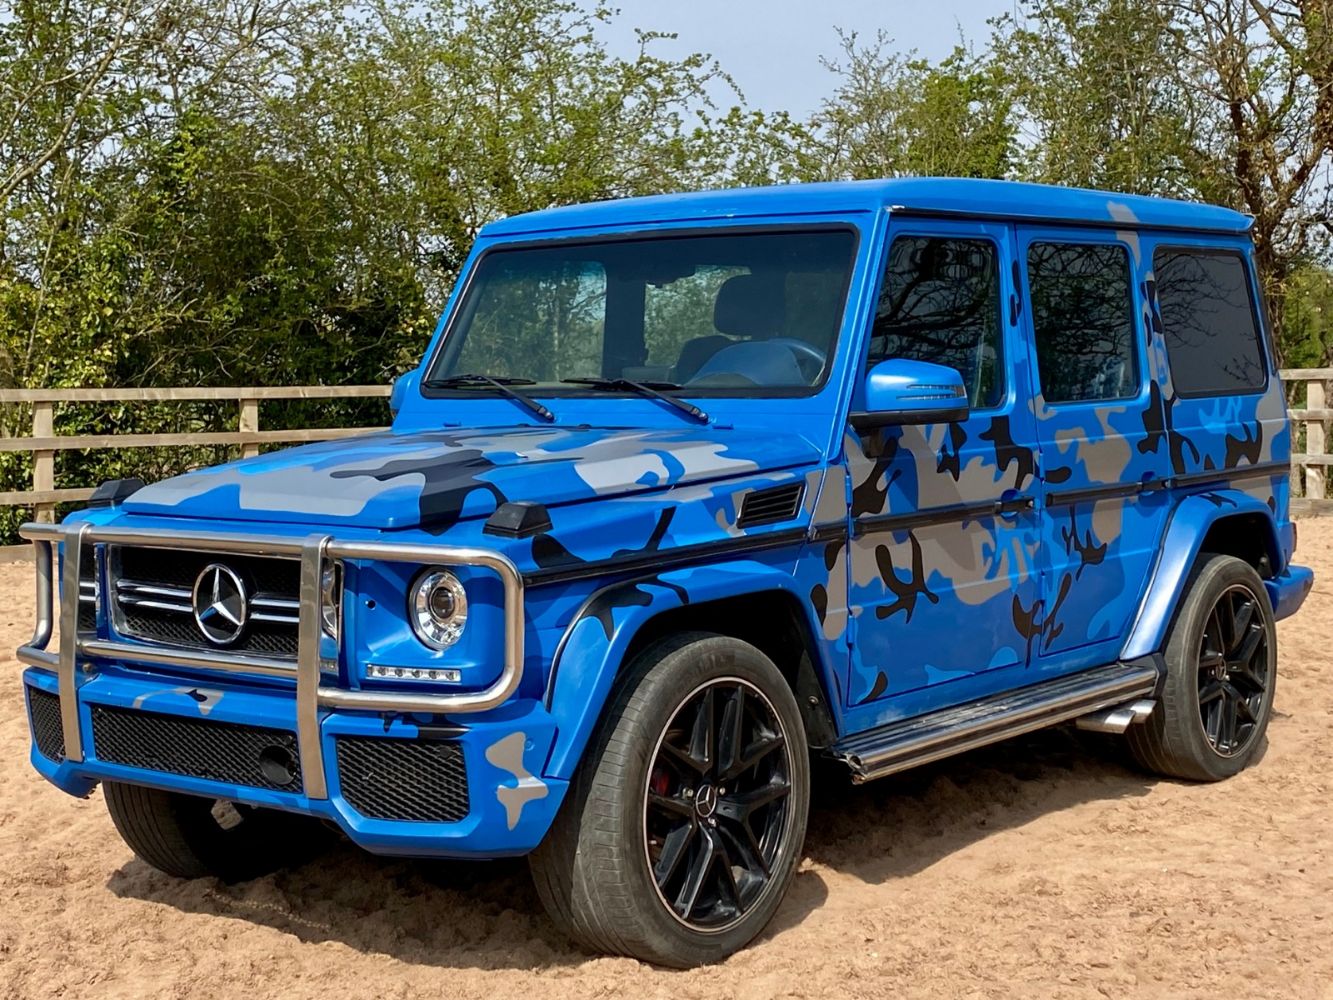 MERCEDES G55 AMG 4X4 G WAGON 2016 G63 FACE LIFT, AUDI A8, BMW 520D M SPORT, FORKLIFTS, PLANT AND MACHINERY, CARS, VANS & MORE, ENDS 7PM SUNDAY!